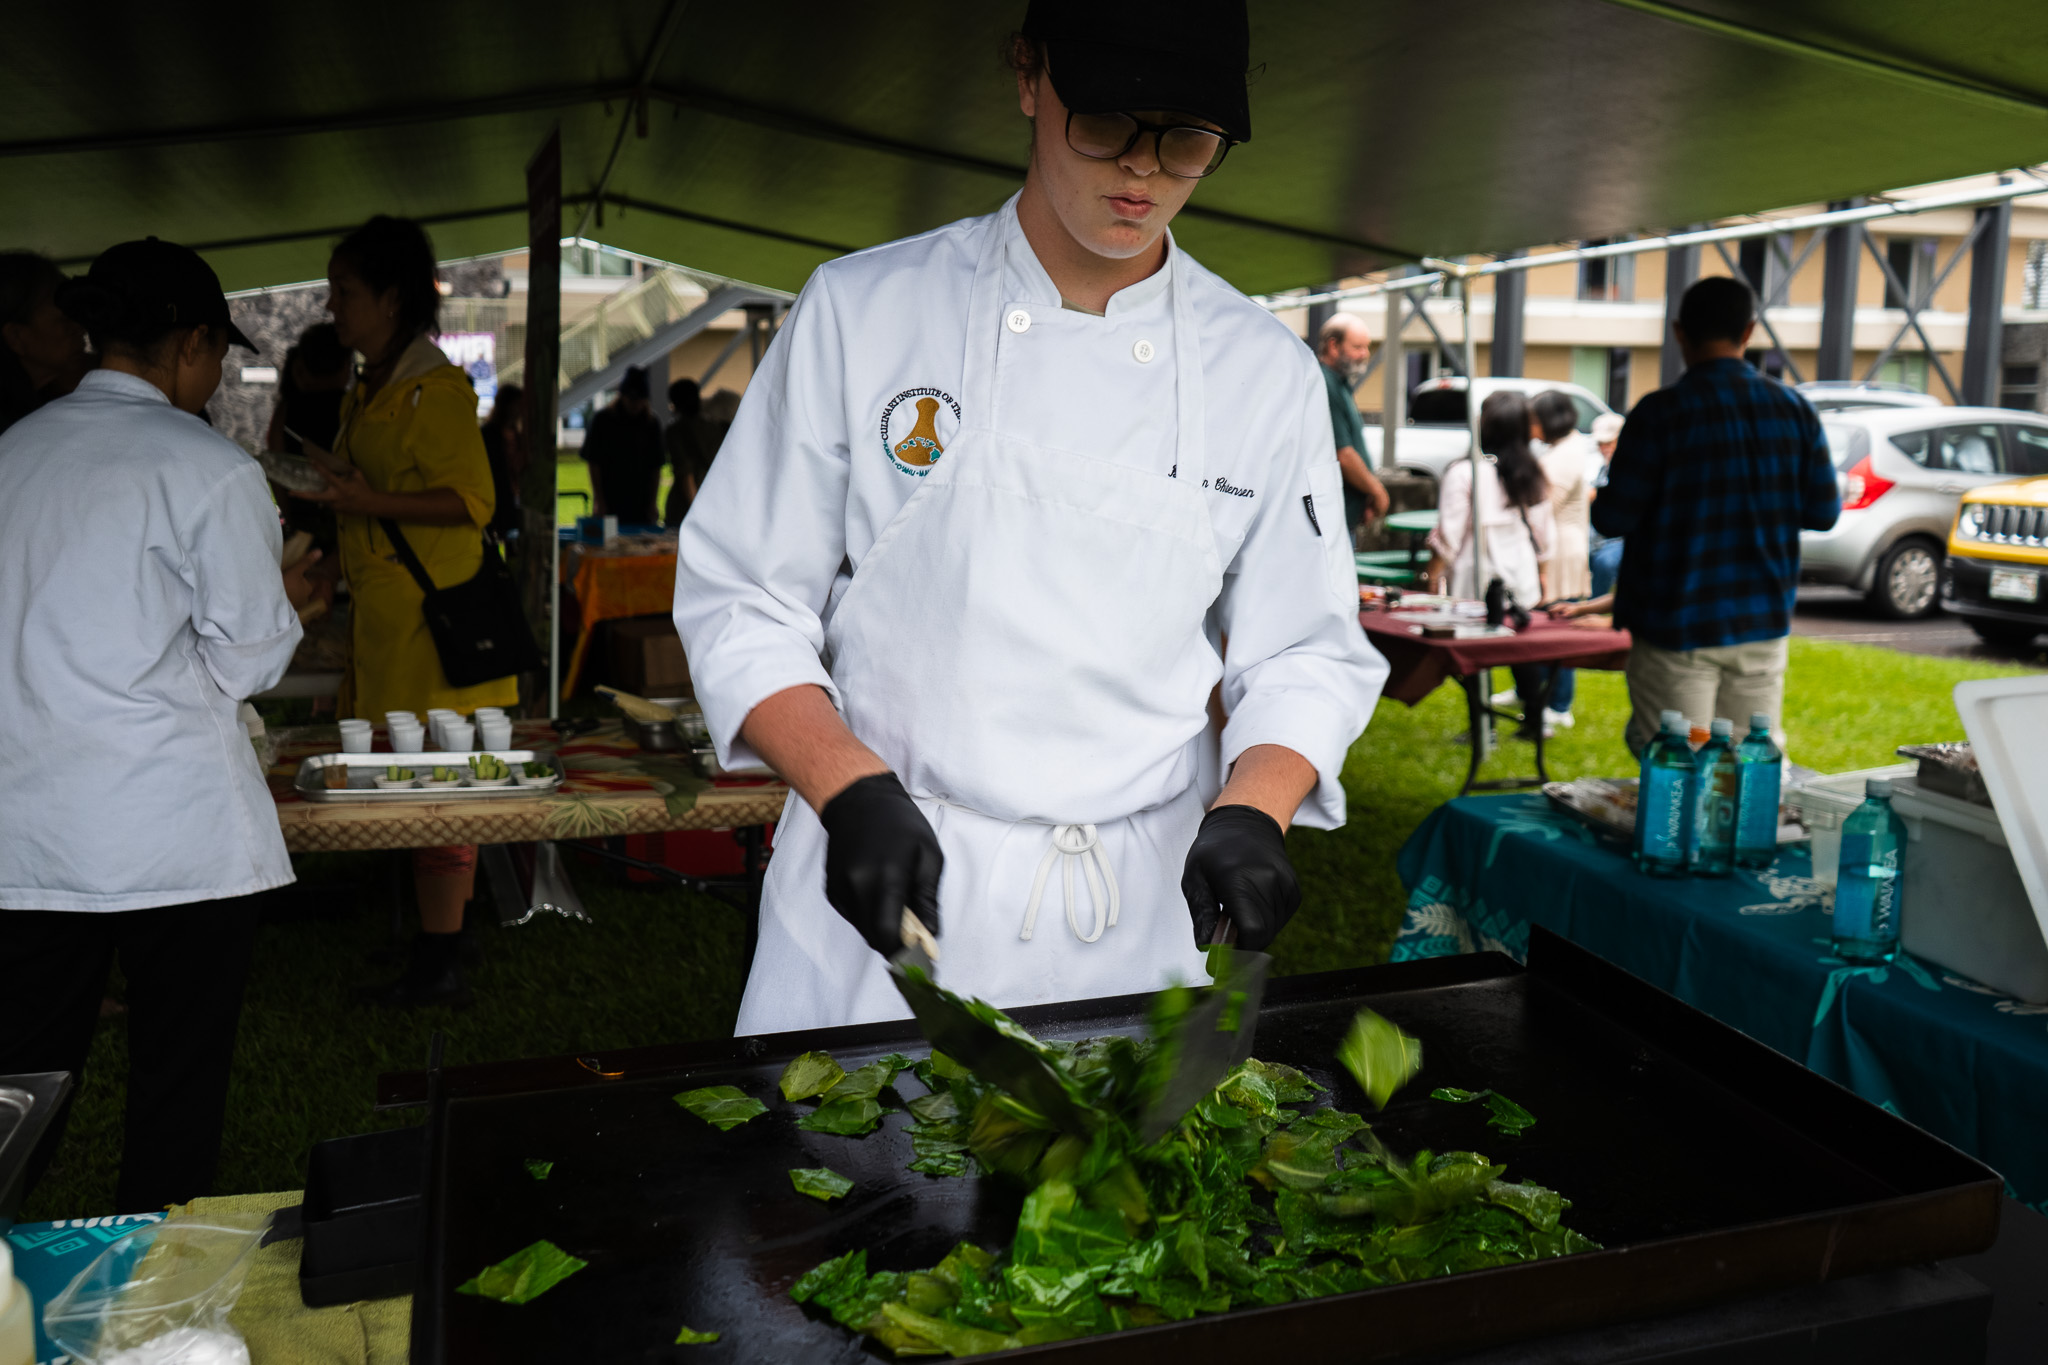 Student Cooking Greens